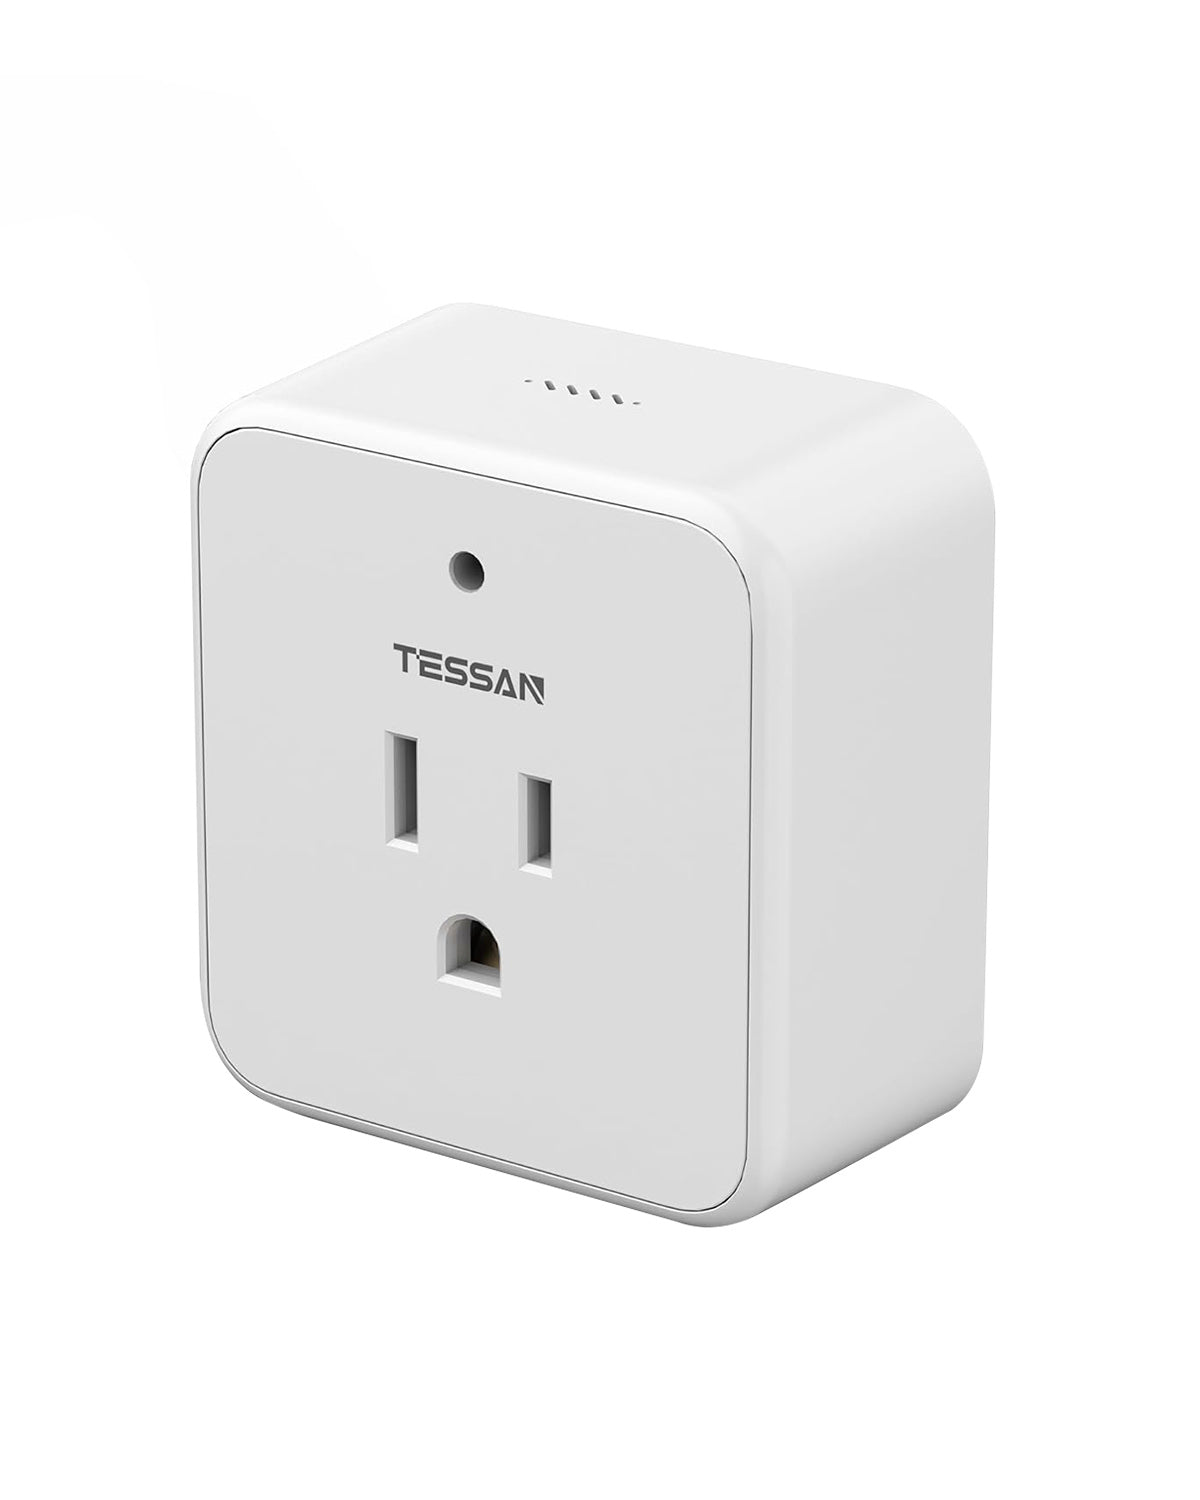 TESSAN Voice Control Outlet, Wireless Remote Control Electrical Outlet, 10A/1250W